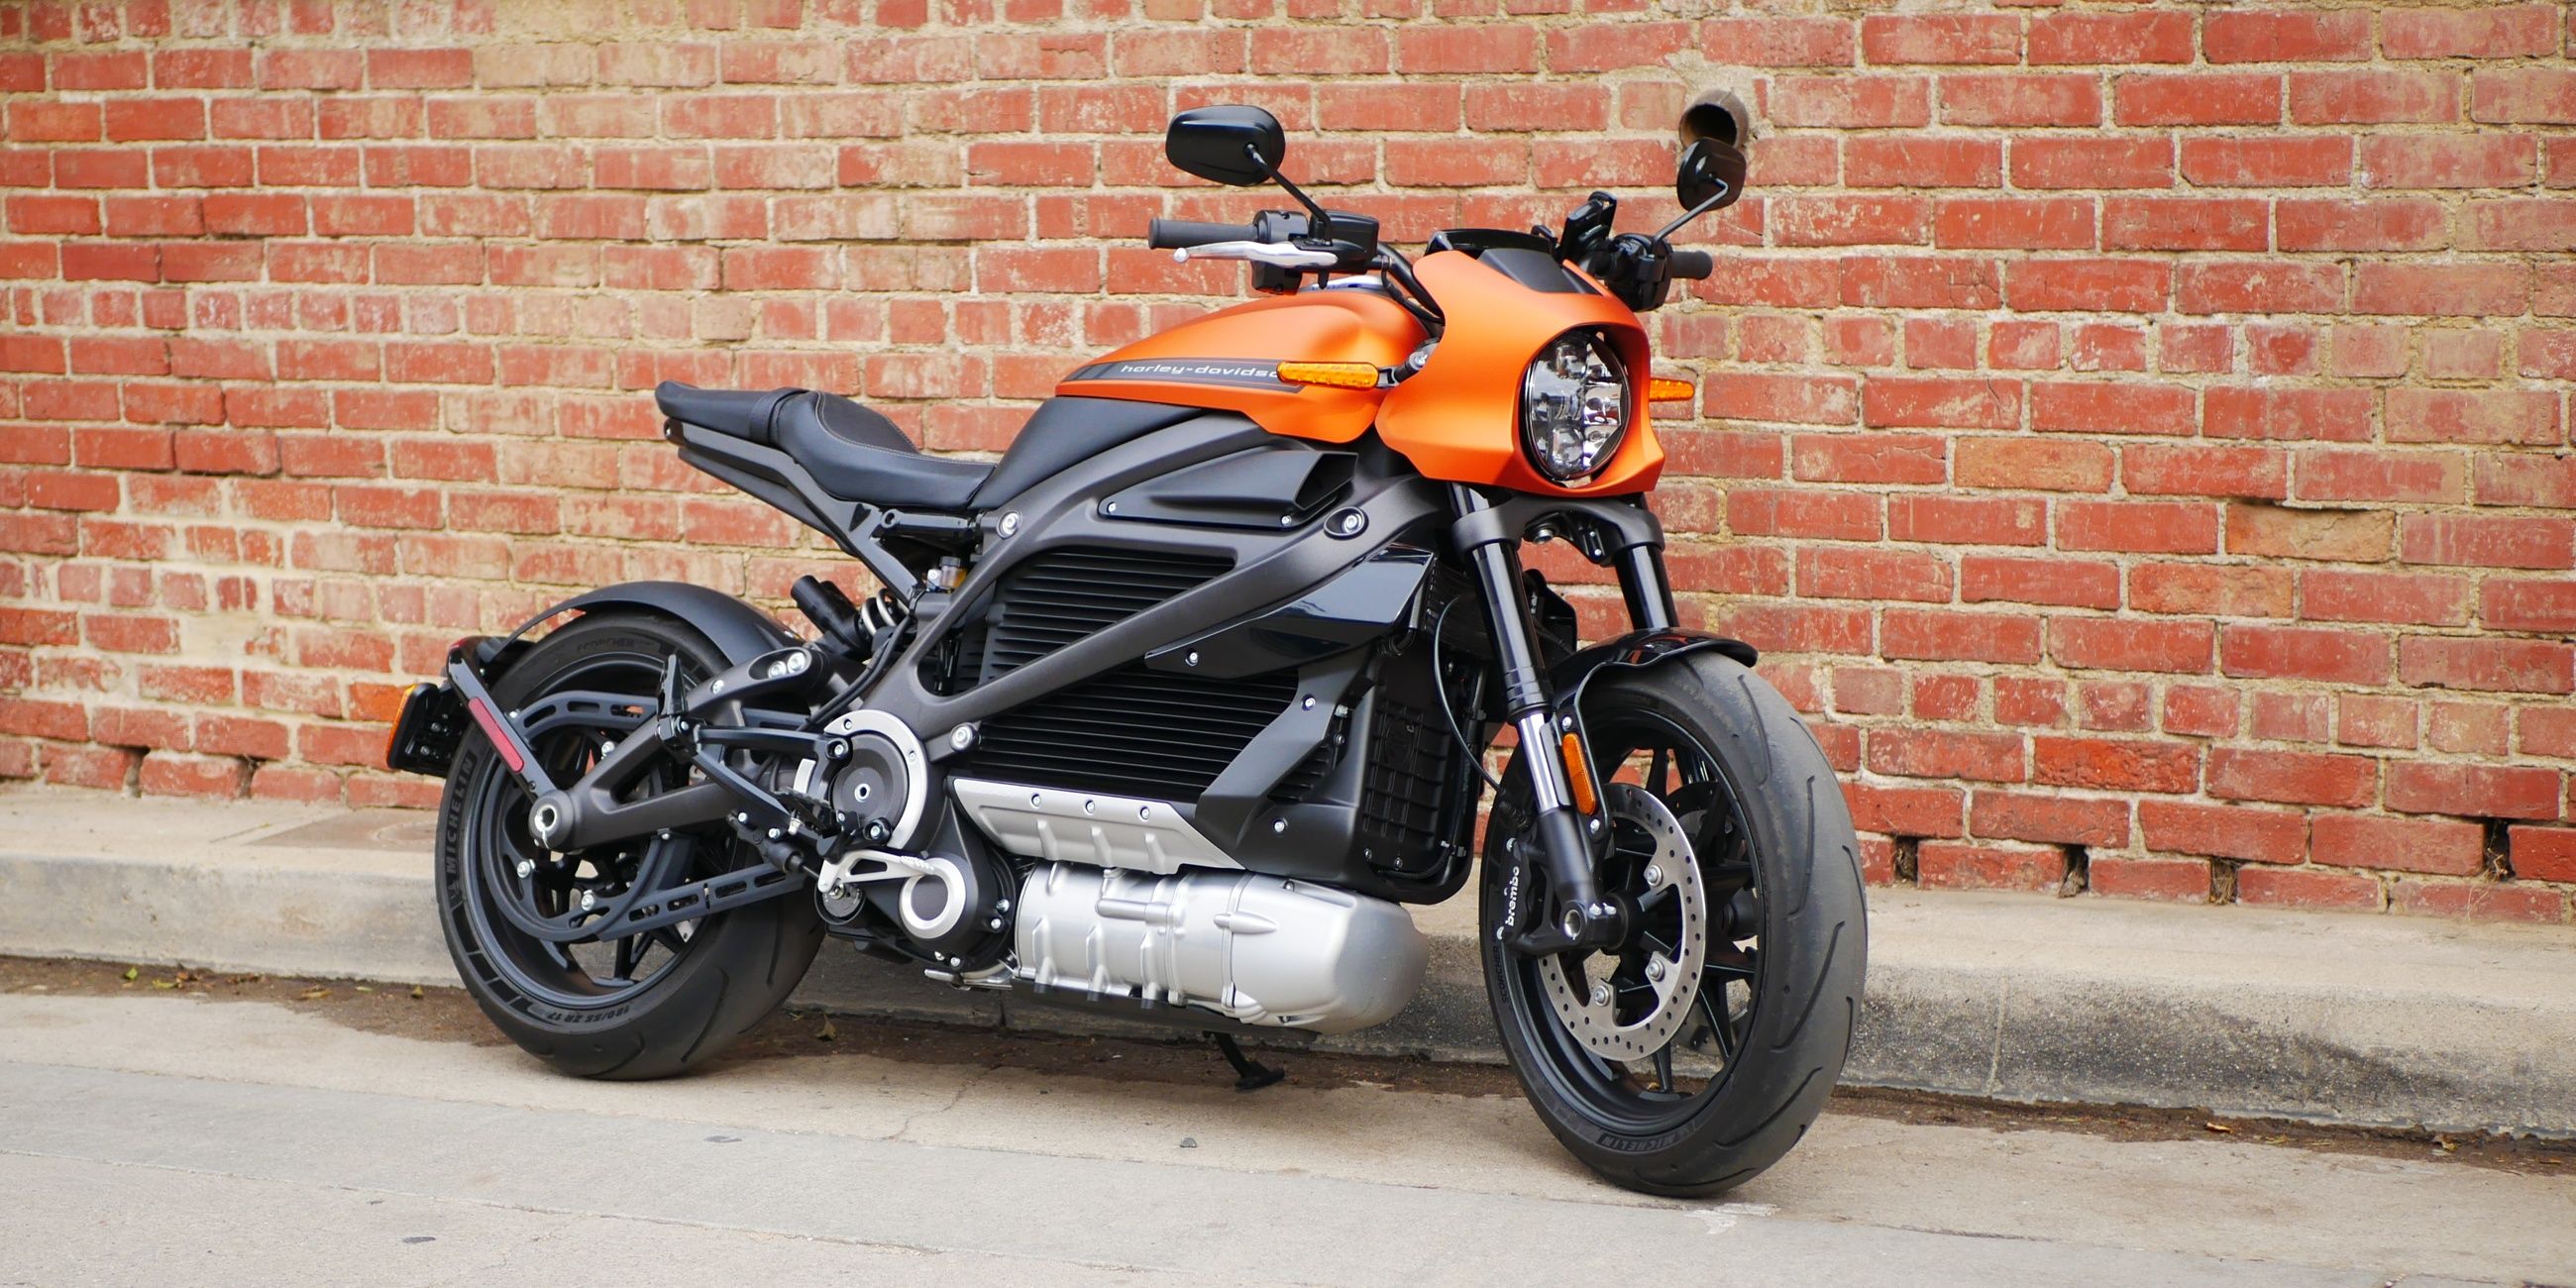 Harley-Davidson Livewire parked by brick wall